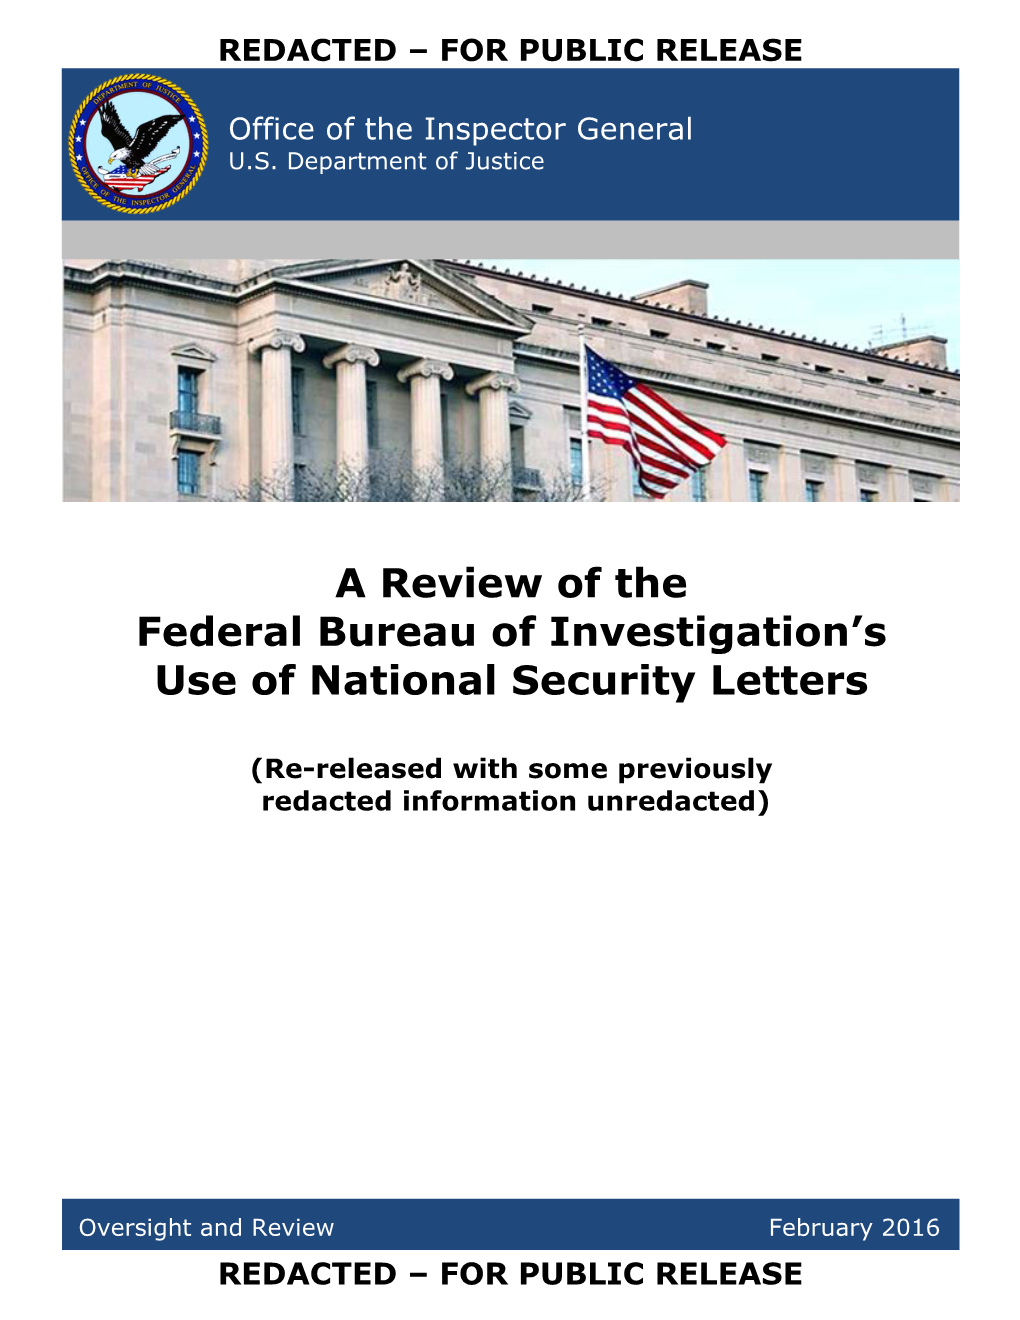 A Review of the Federal Bureau of Investigation's Use of National Security Letters